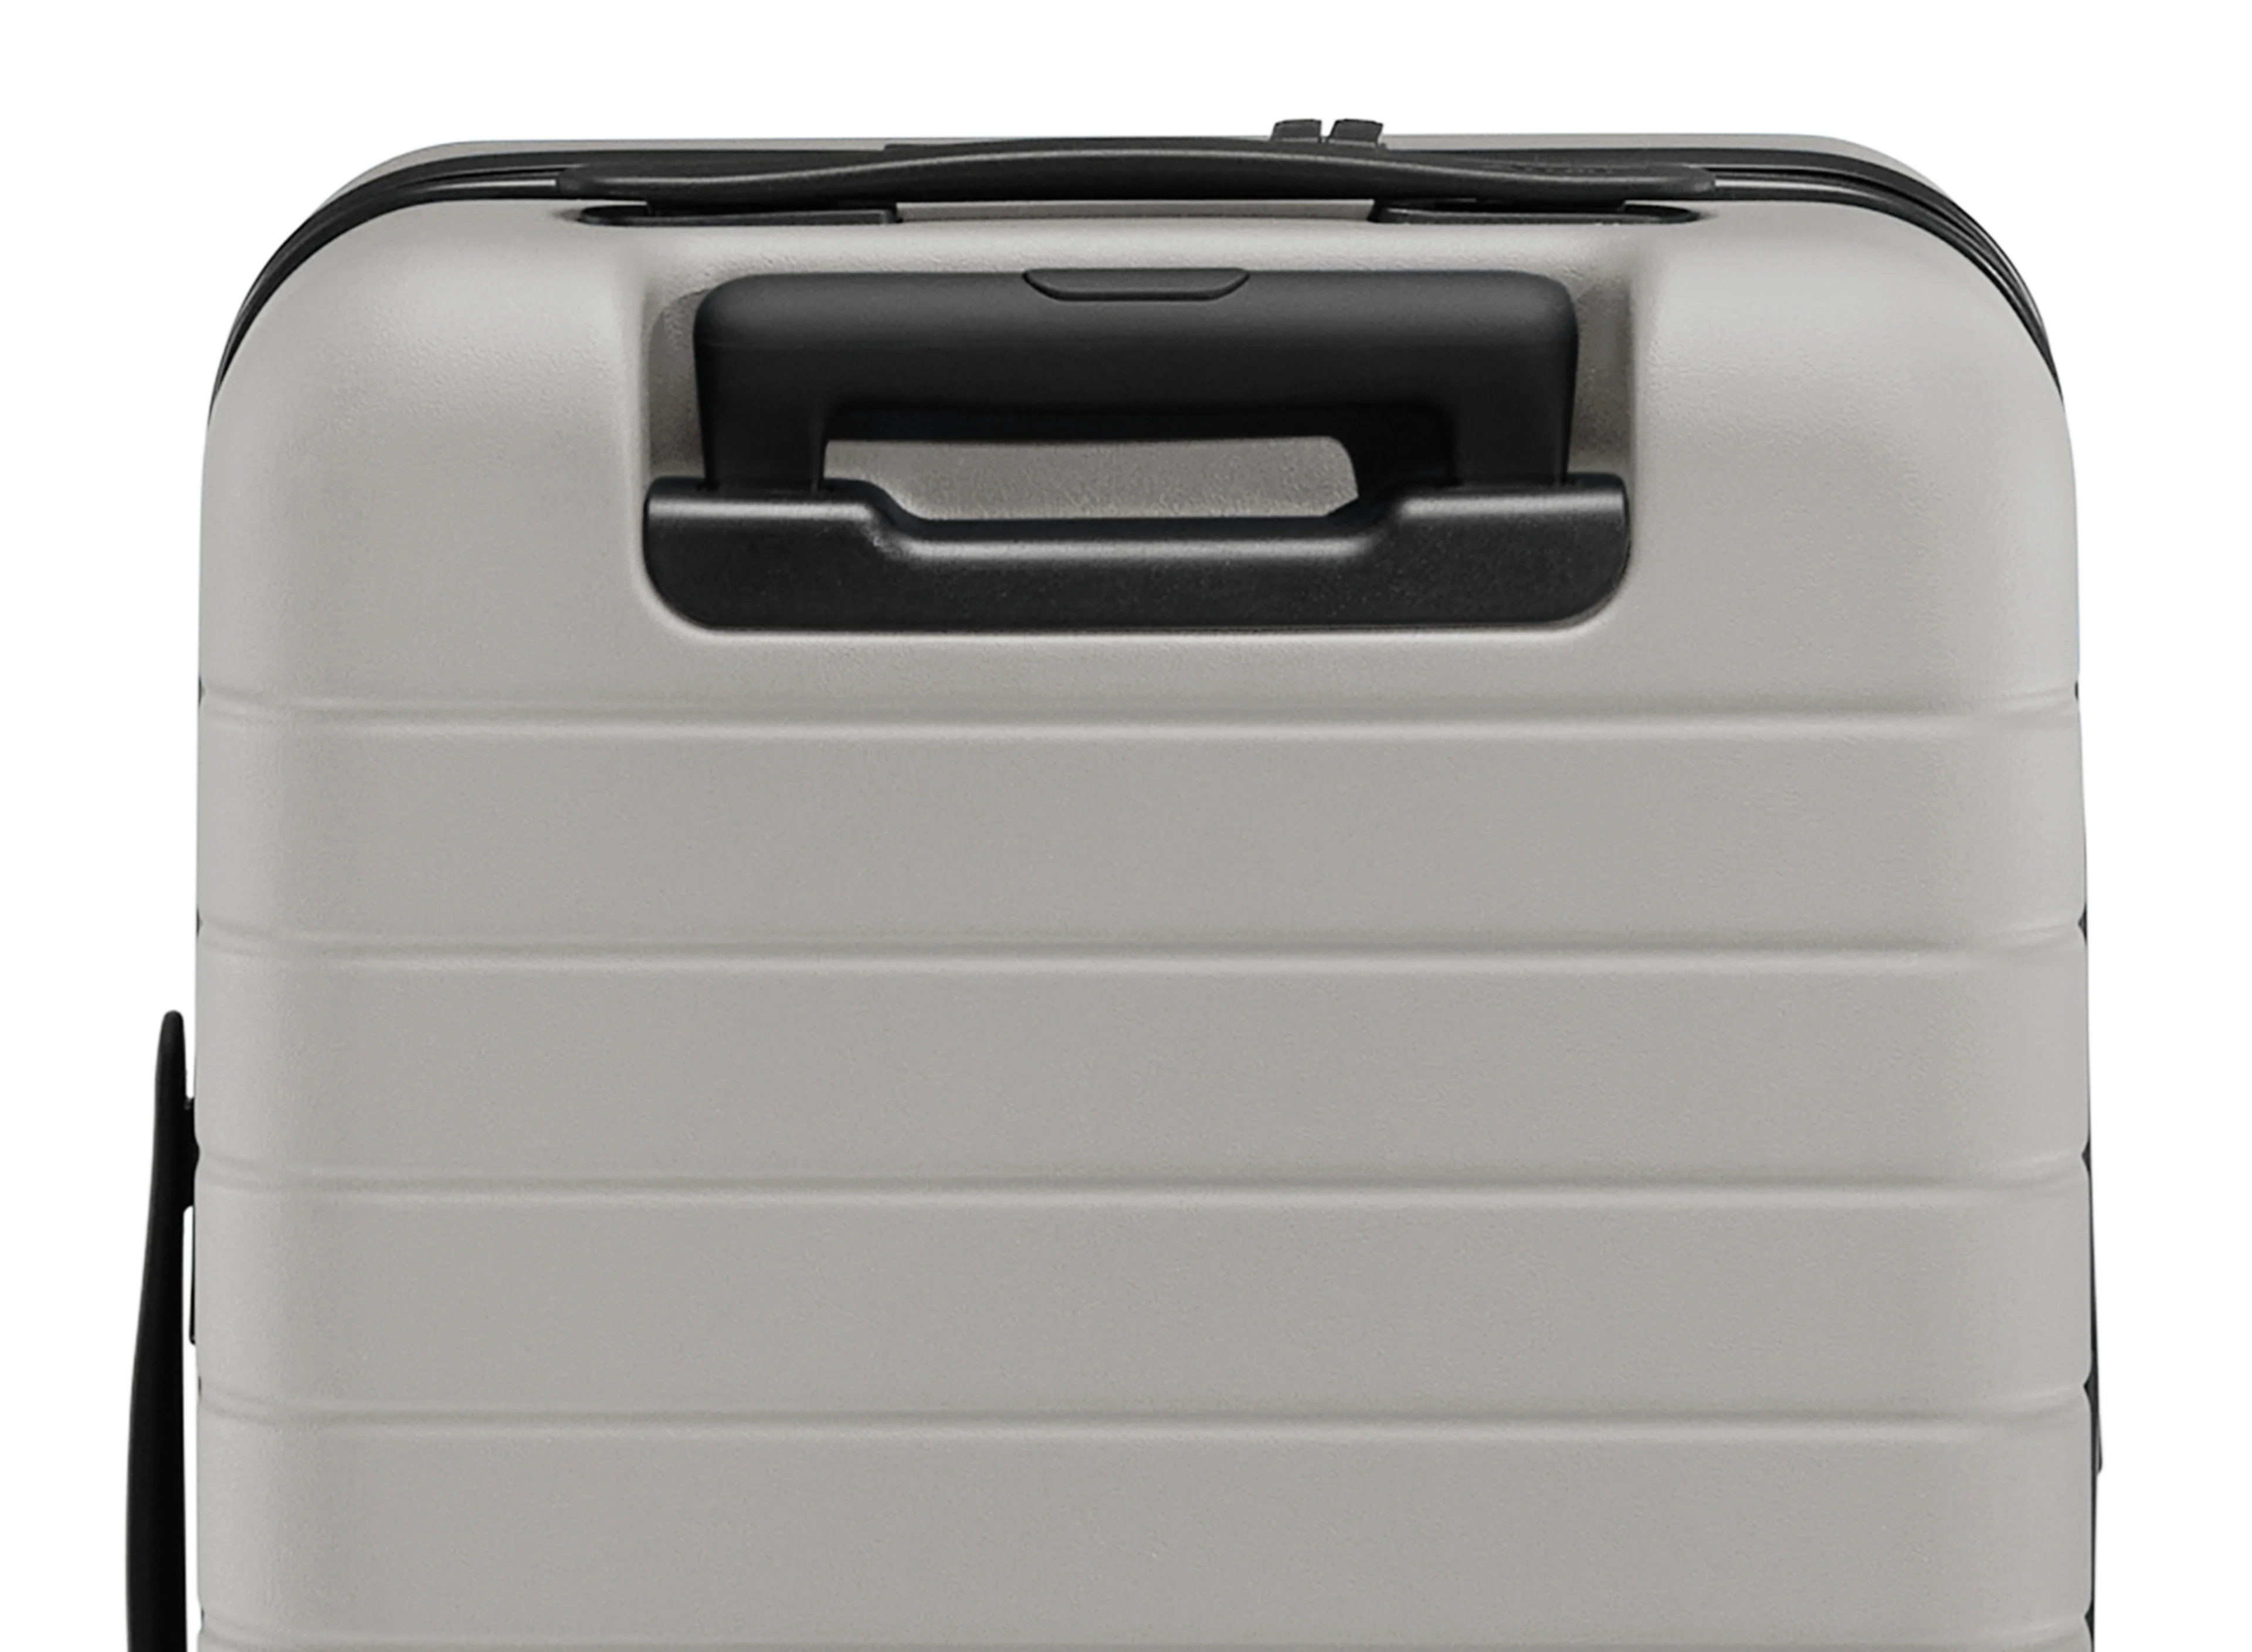 The Carry-On Flex in Cloud Gray